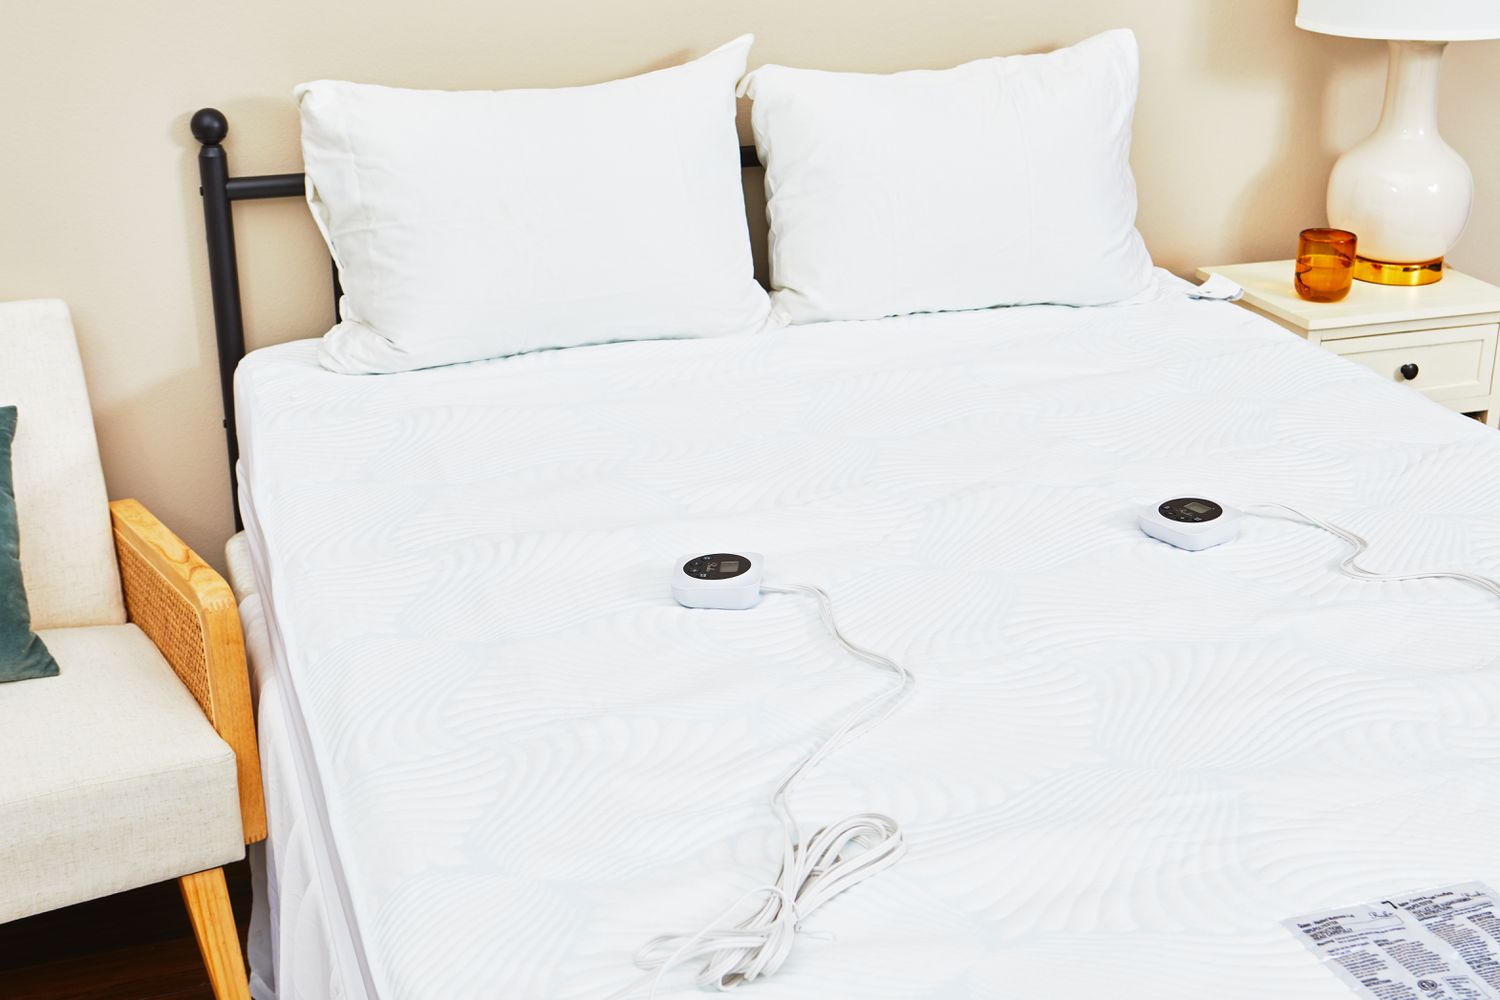 How To Clean A Heated Mattress Pad